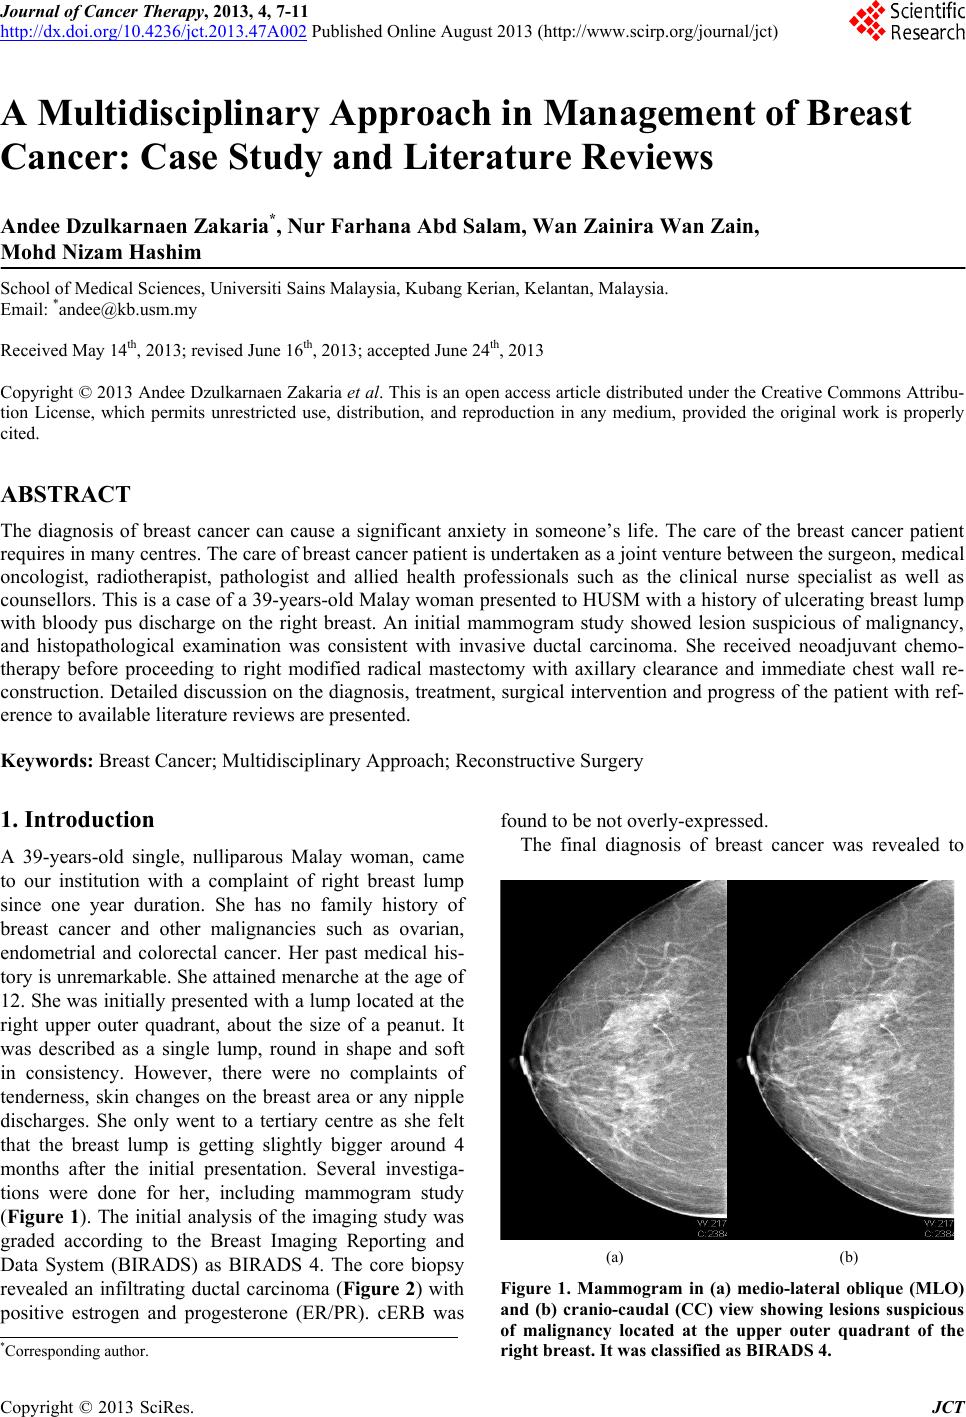 breast cancer awareness research paper